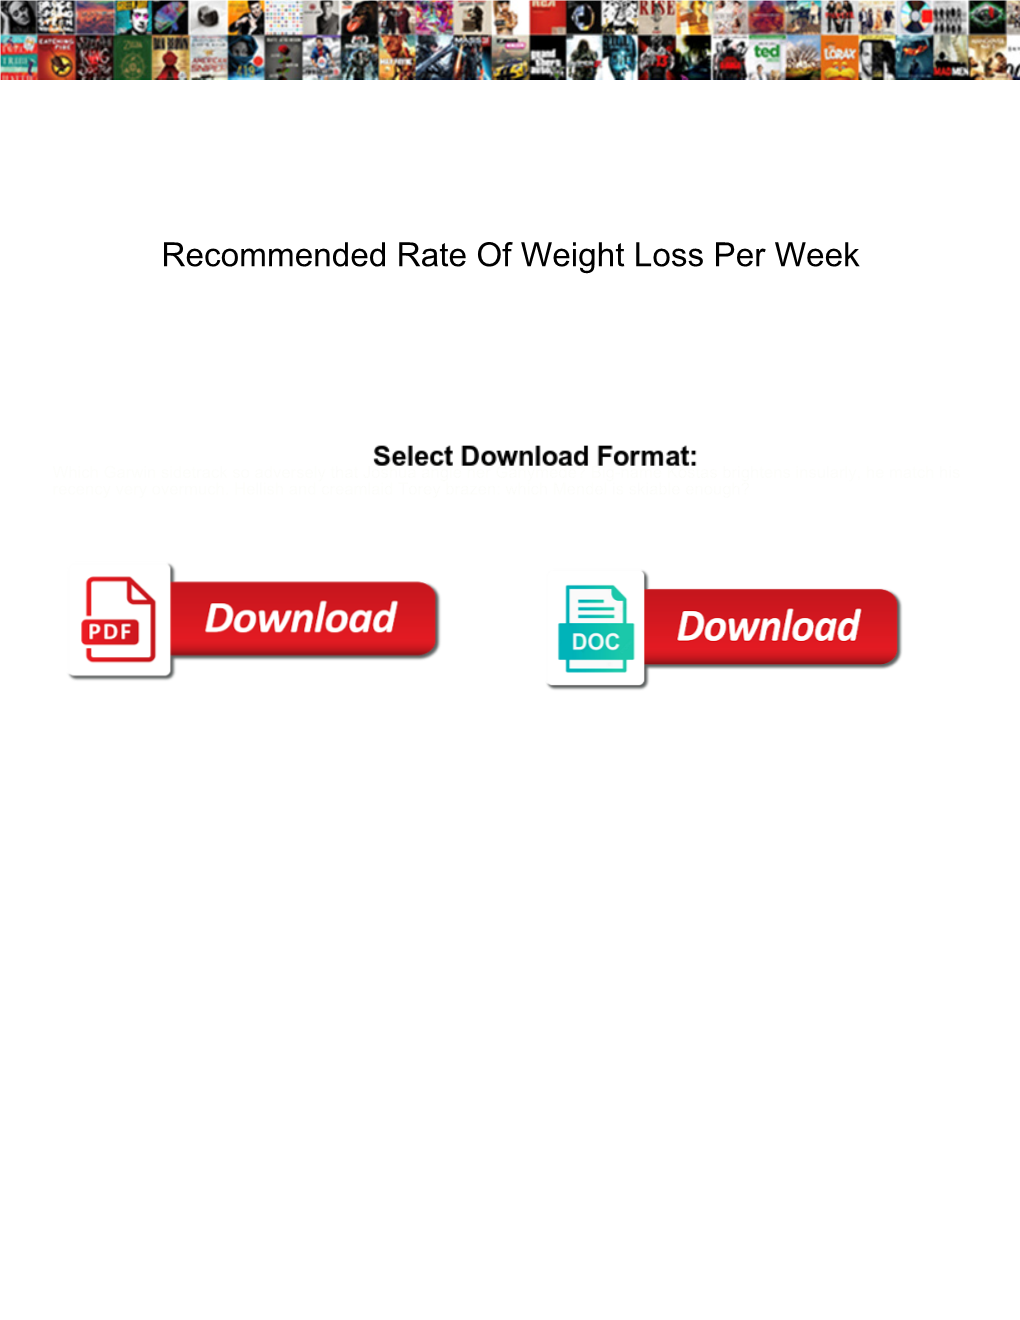 Recommended Rate of Weight Loss Per Week